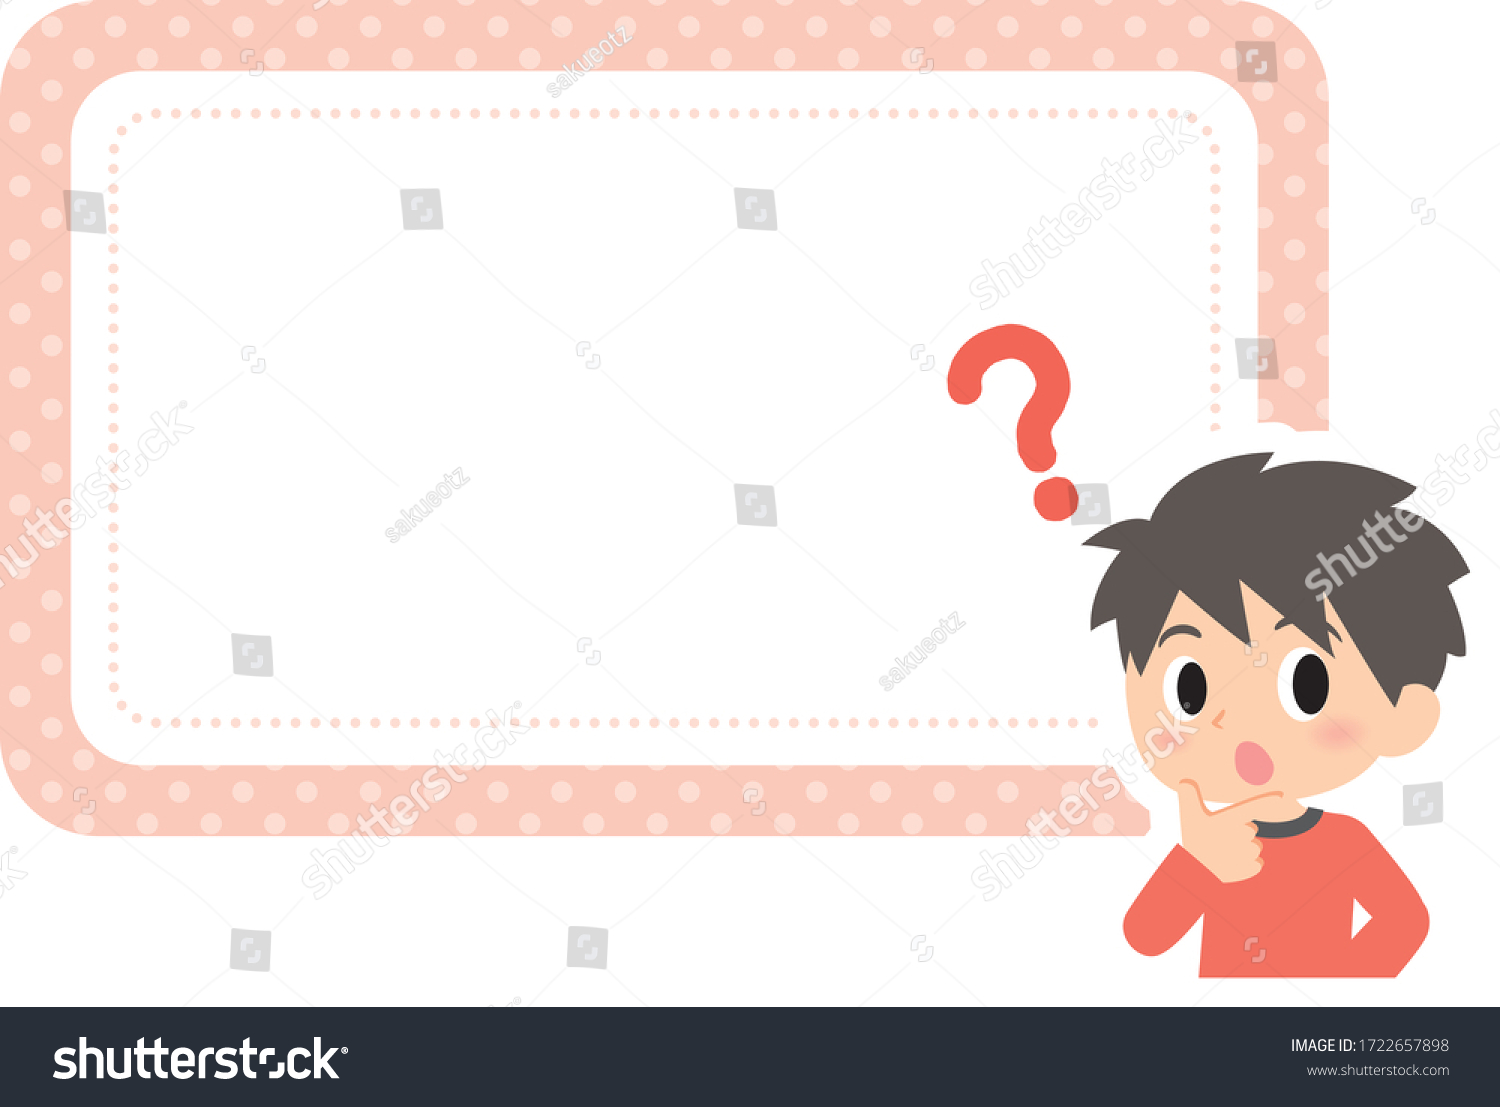 Boy Expression Emotions Frameillust Means Question Stock Vector Royalty Free